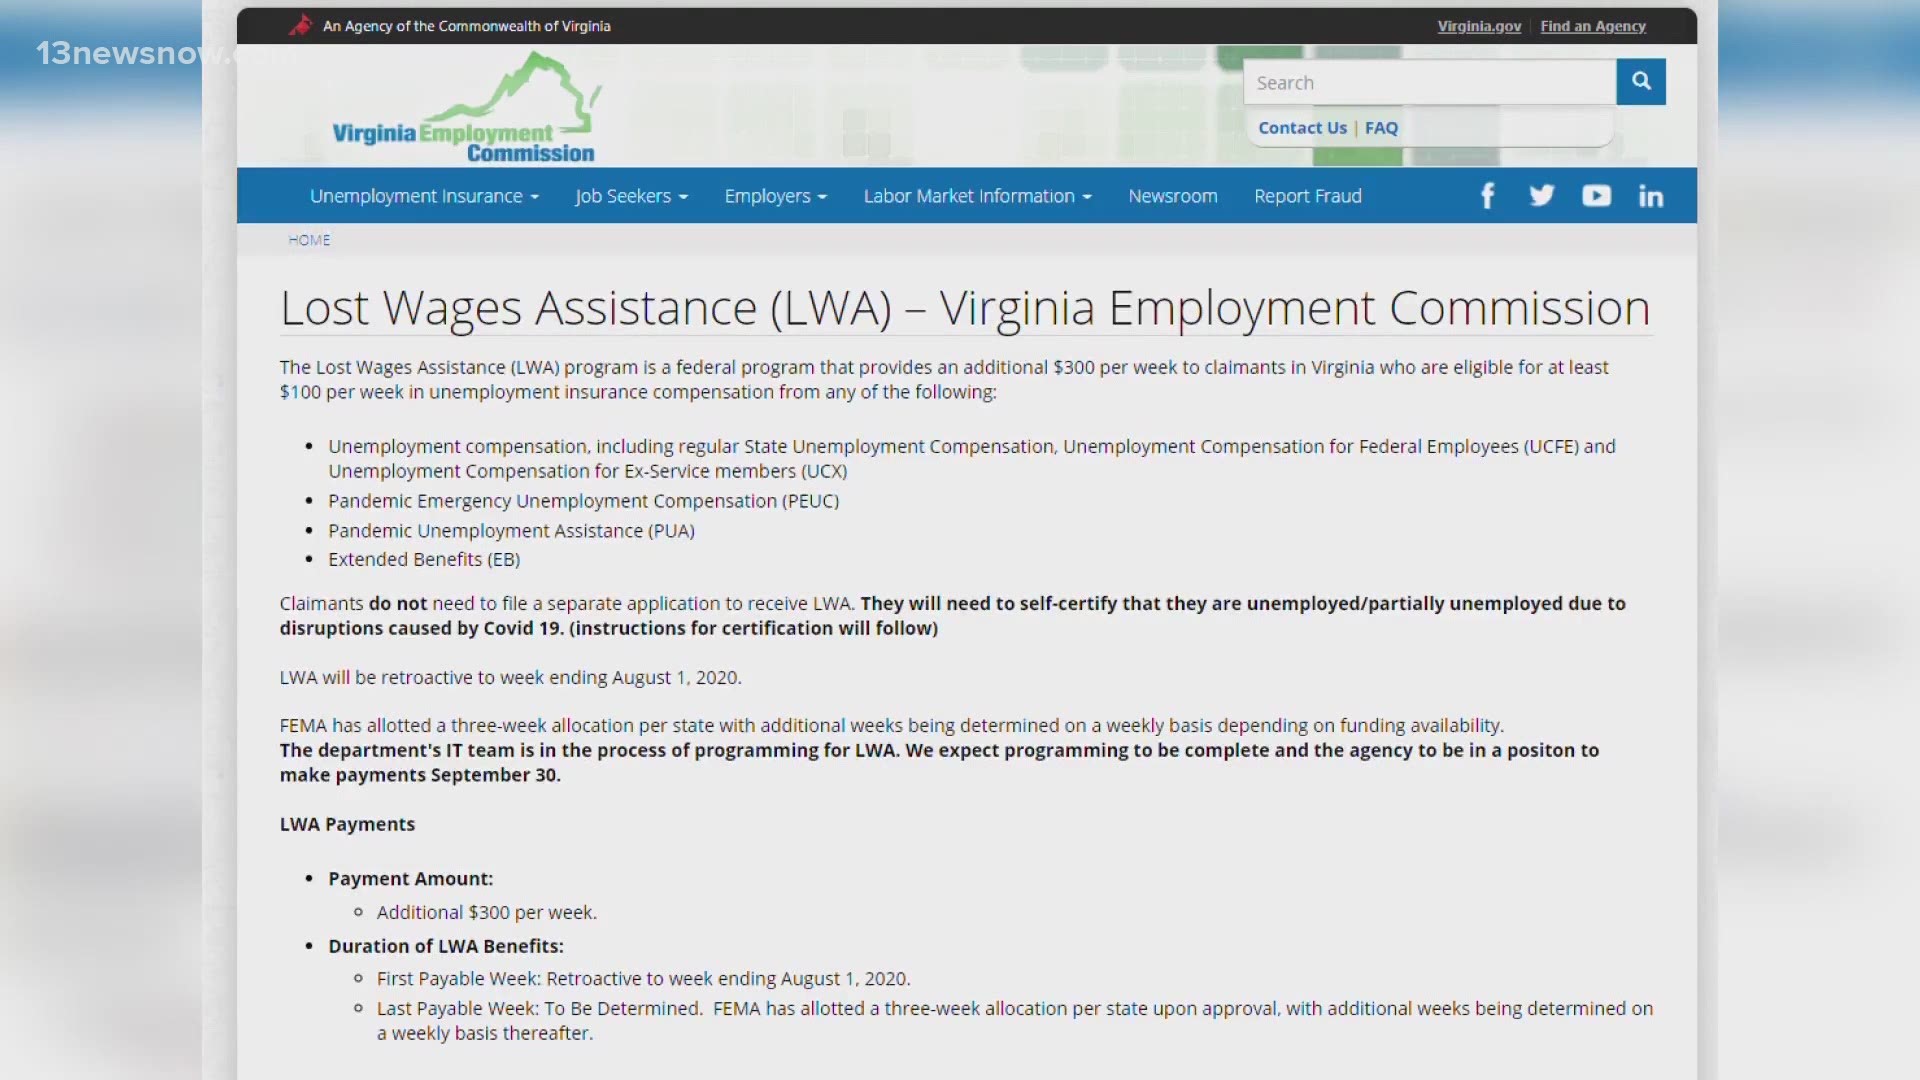 A Virginia Employment Commission said they hope to start and have some portions out sooner, but don’t know that they can.